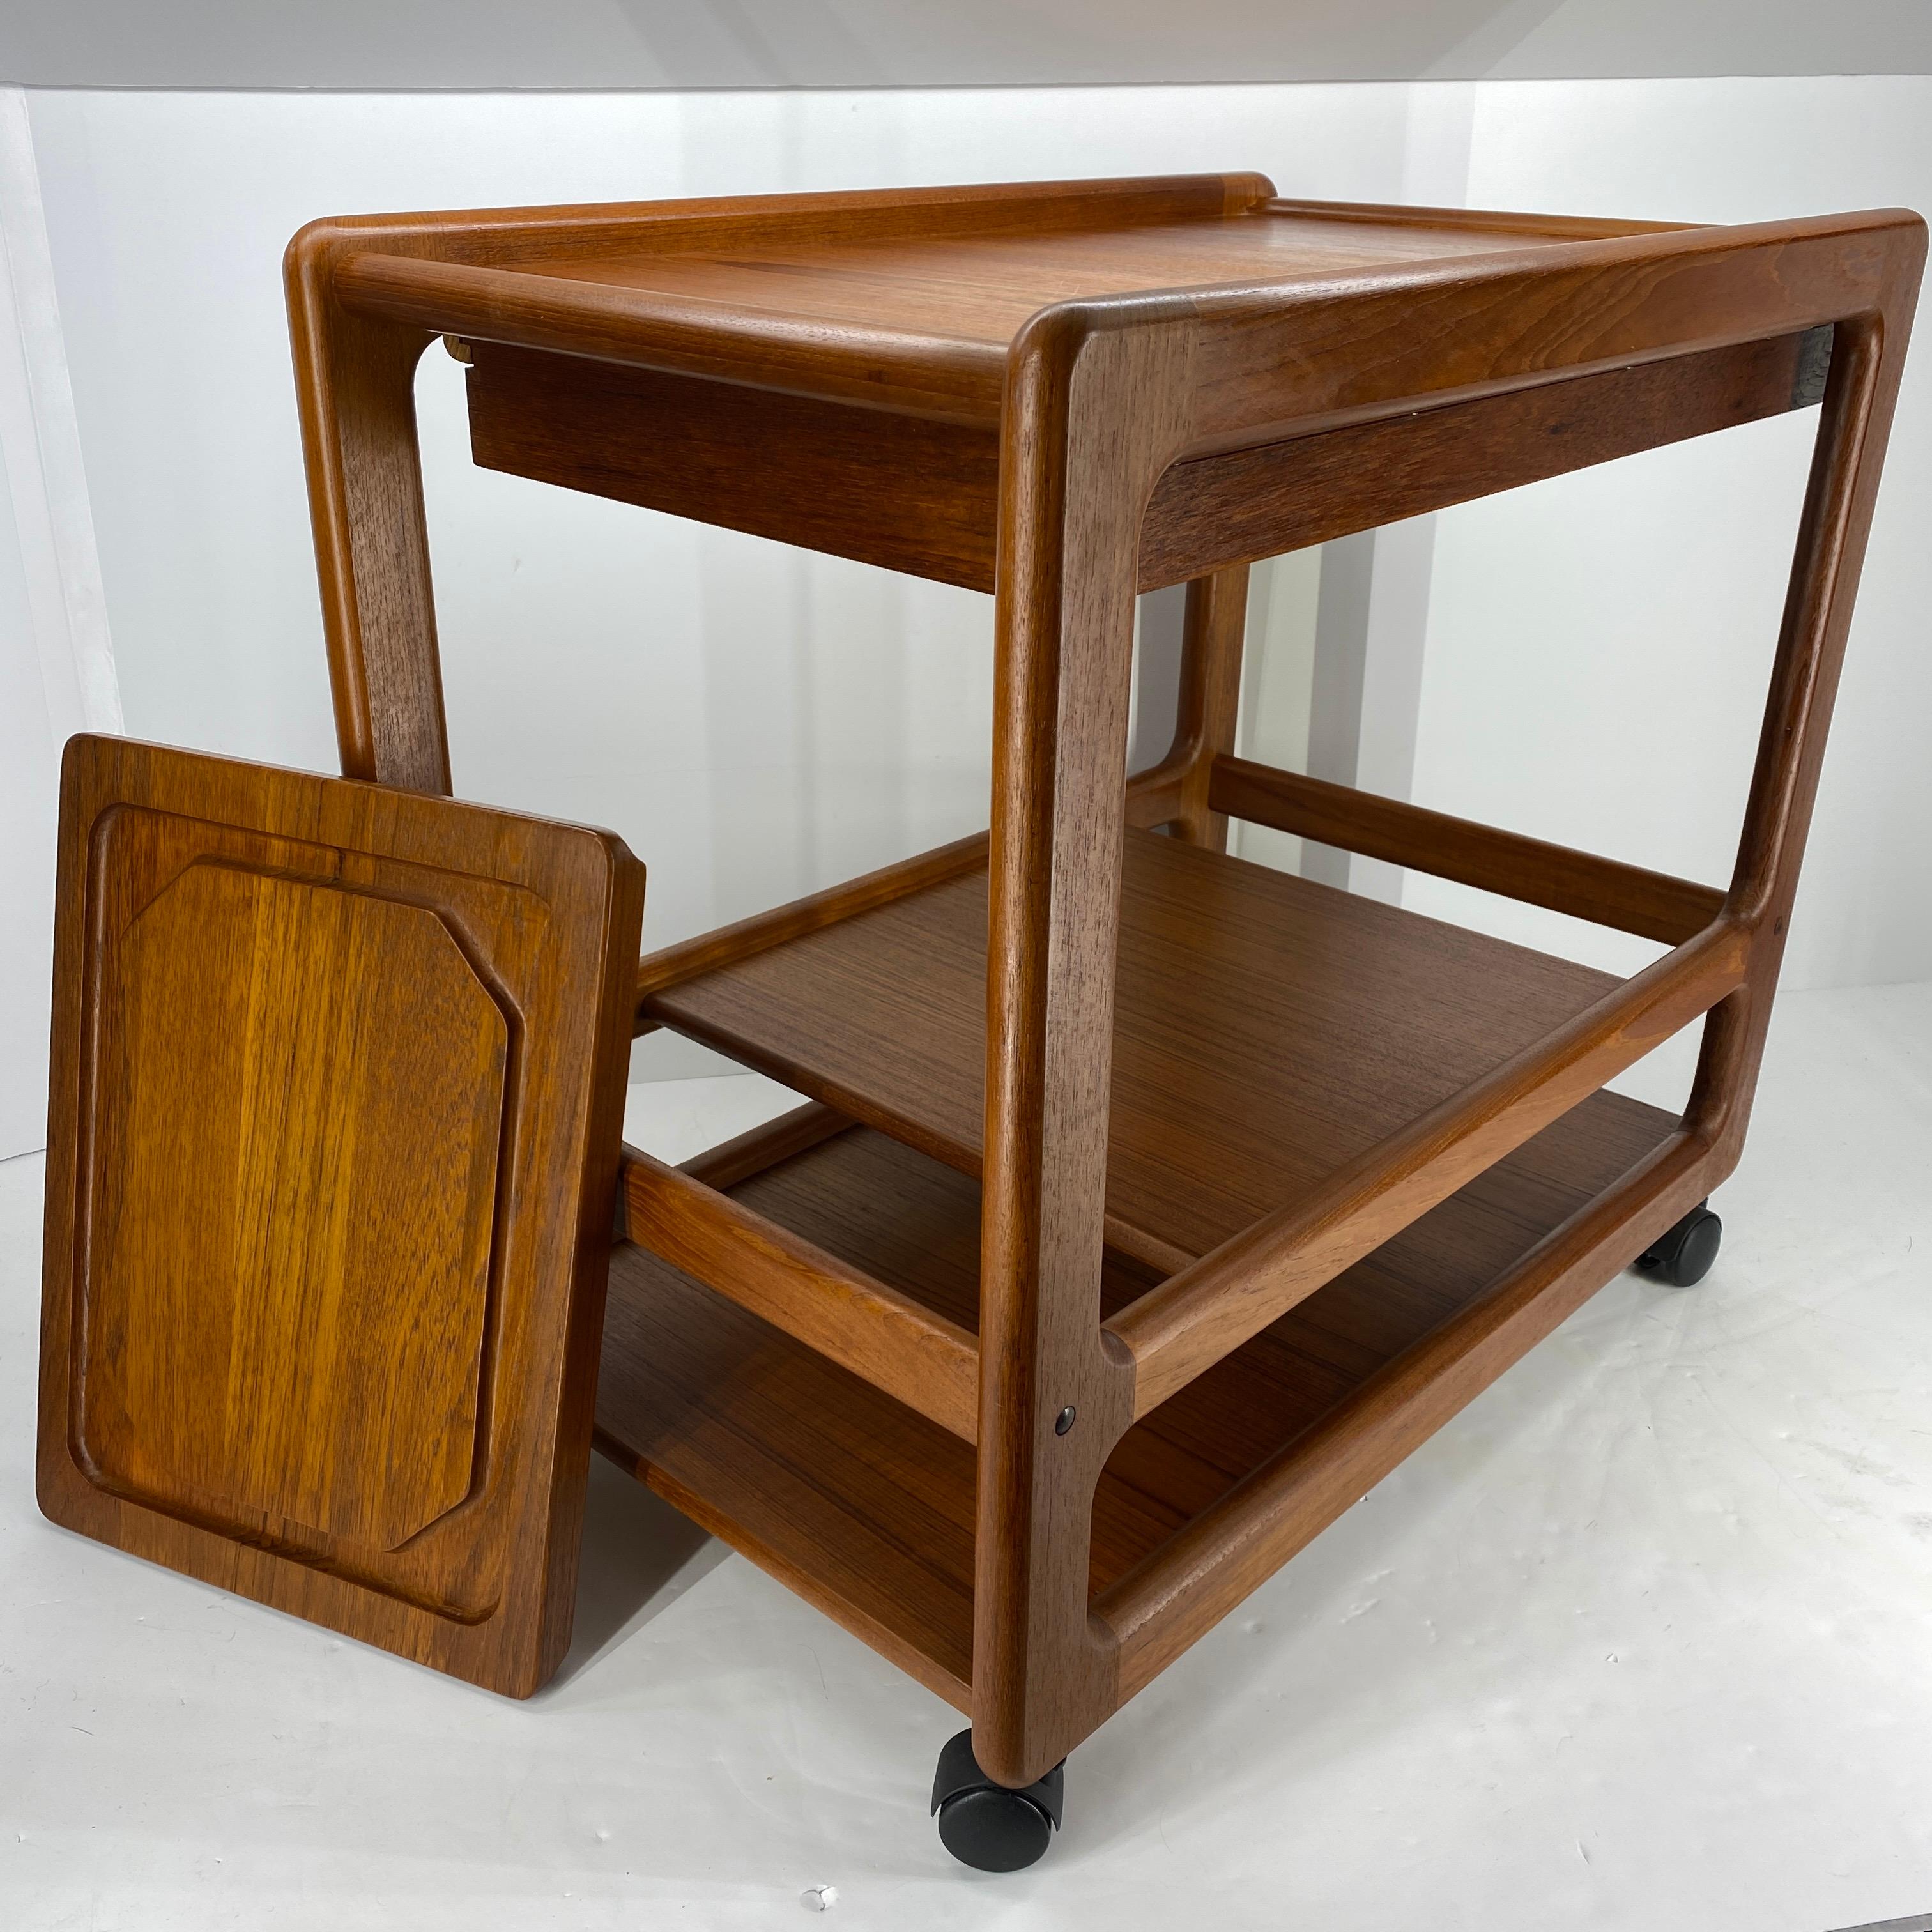 Mid-Century Modern teak bar trolley or serving cart by Vildbjerg Mobelfabrik
Just look at this all teak bar cart serving trolley. Three tiers all glowing with beautiful wood grain. There is a single drawer that can be either tucked away or easily